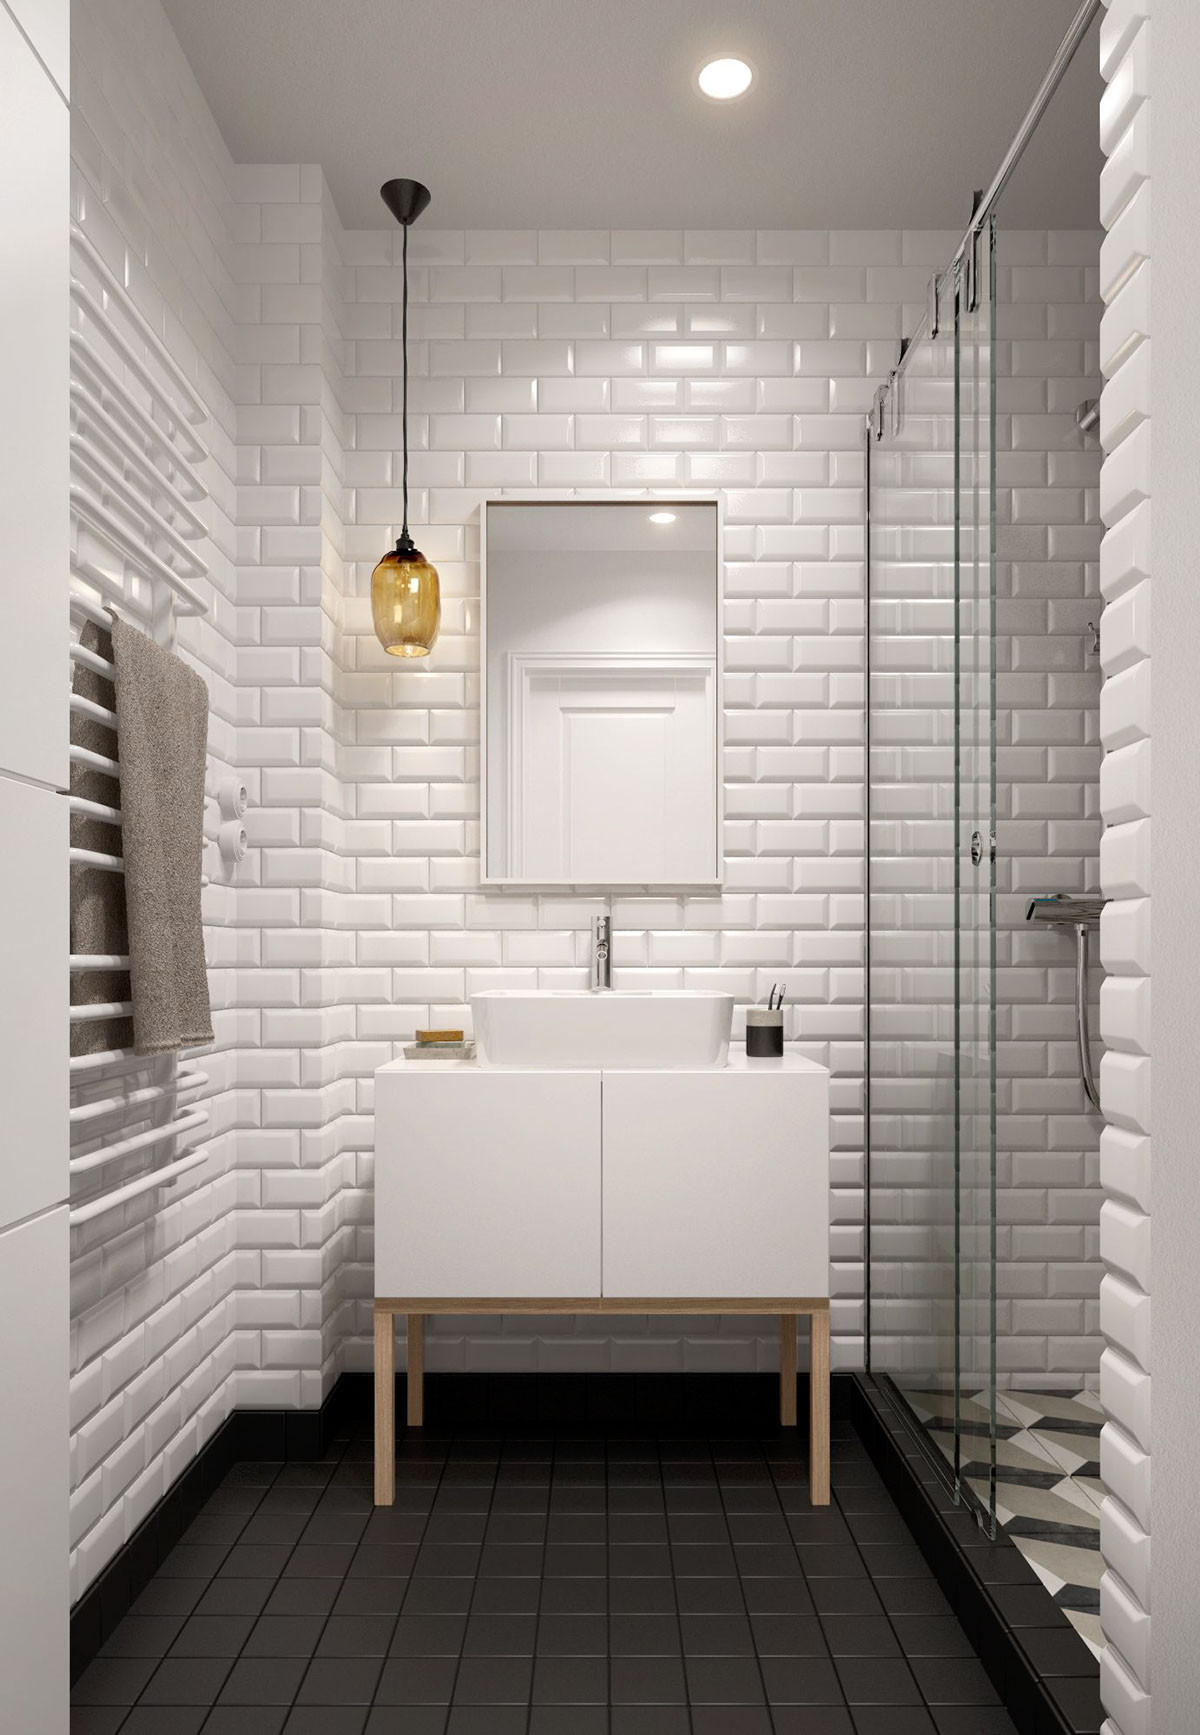 White Bathroom Tiles
 A Midcentury Inspired Apartment with Scandinavian Tendencies